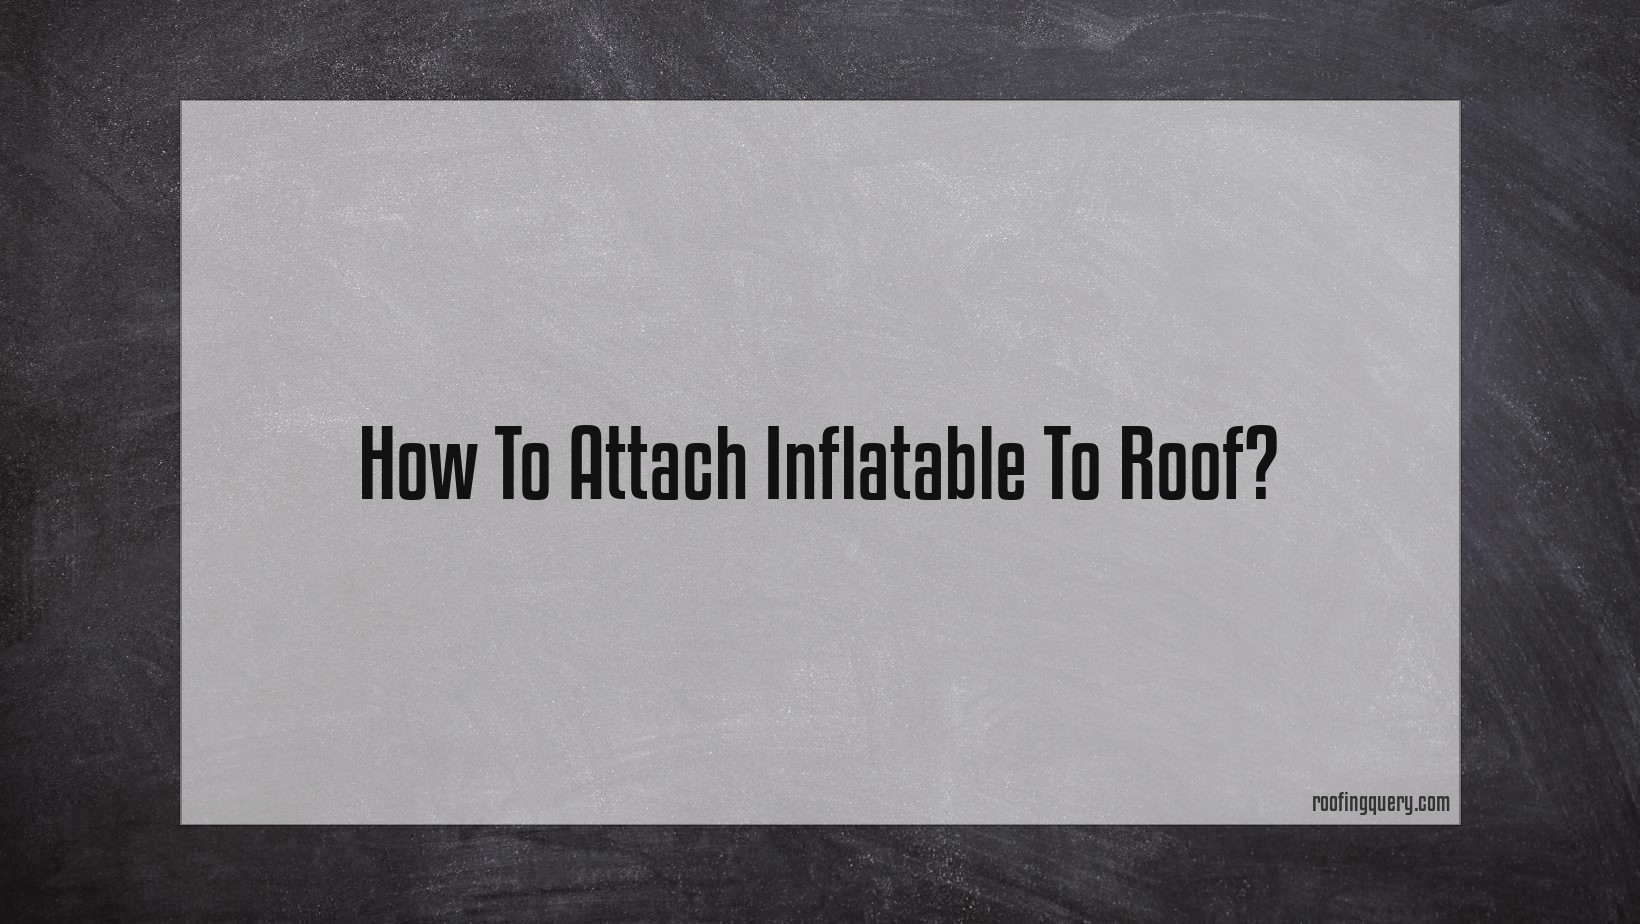 How To Attach Inflatable To Roof?